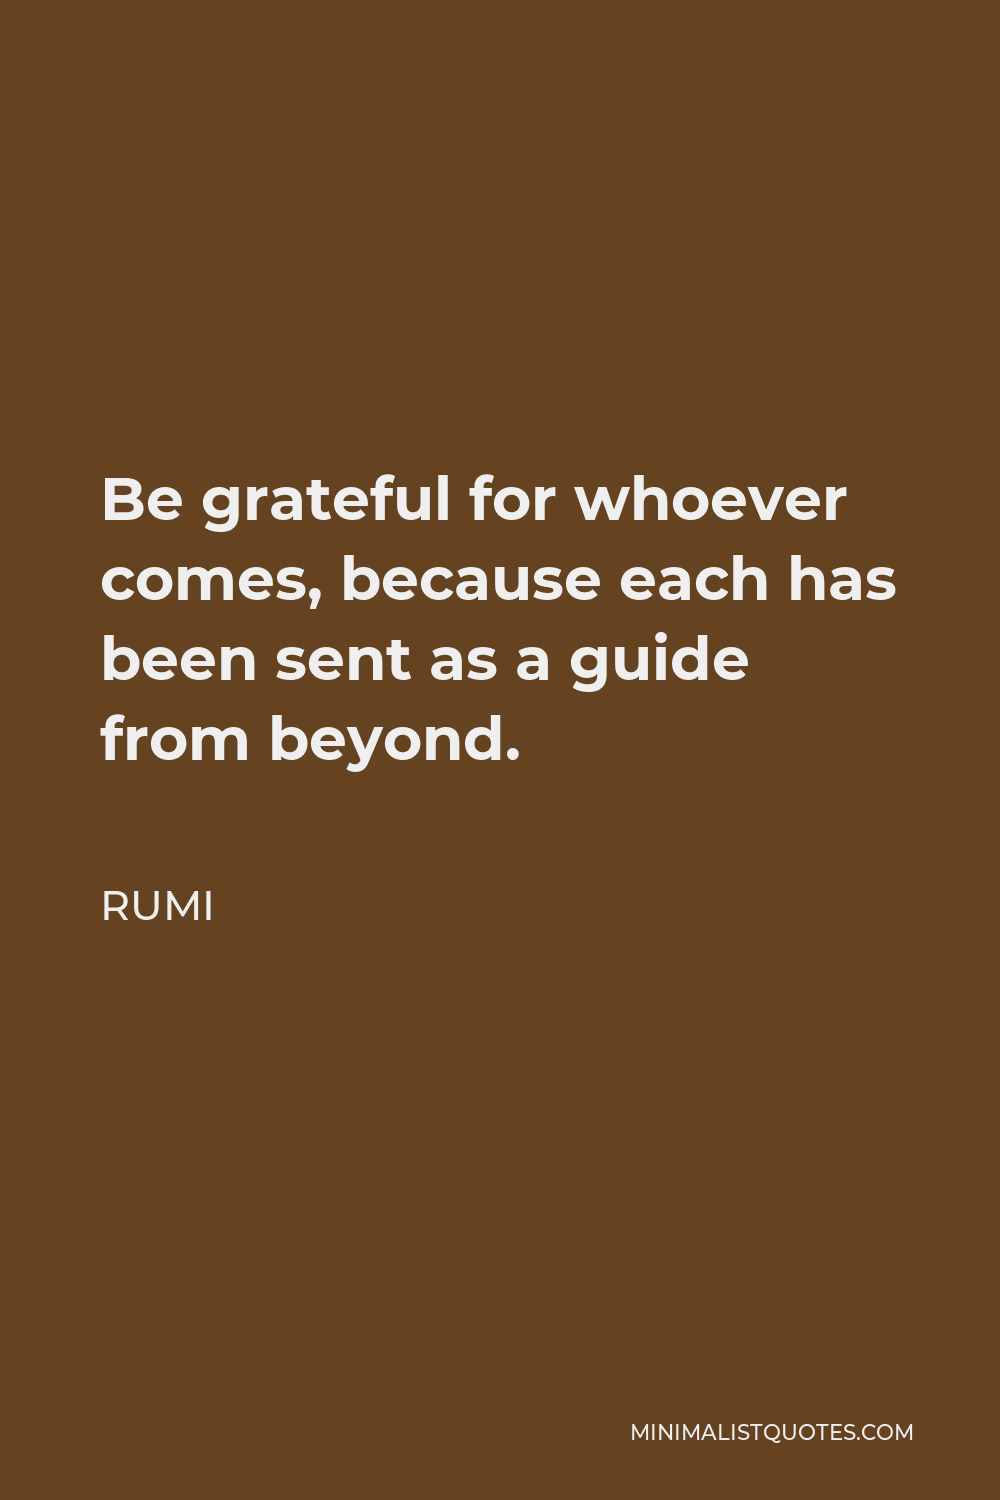 Rumi Quote - Be grateful for whoever comes, because each has been sent as a guide from beyond.